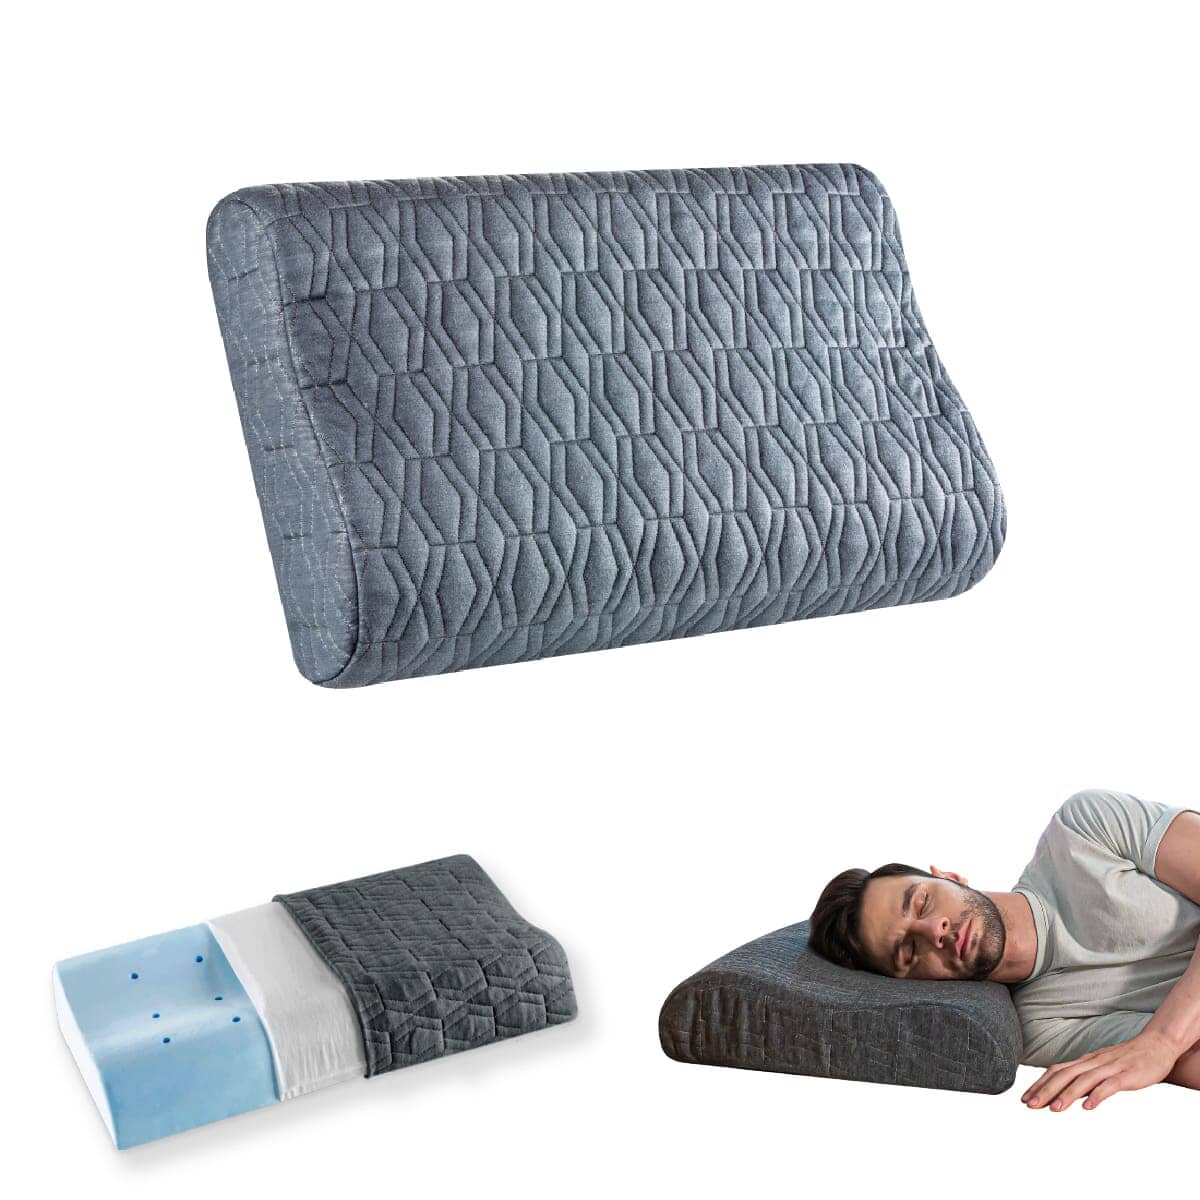 Aloe - Cooling Gel Memory Foam Cervical Pillow - Contour - Medium Firm Contour Pillow The White Willow X-Small Grey 1